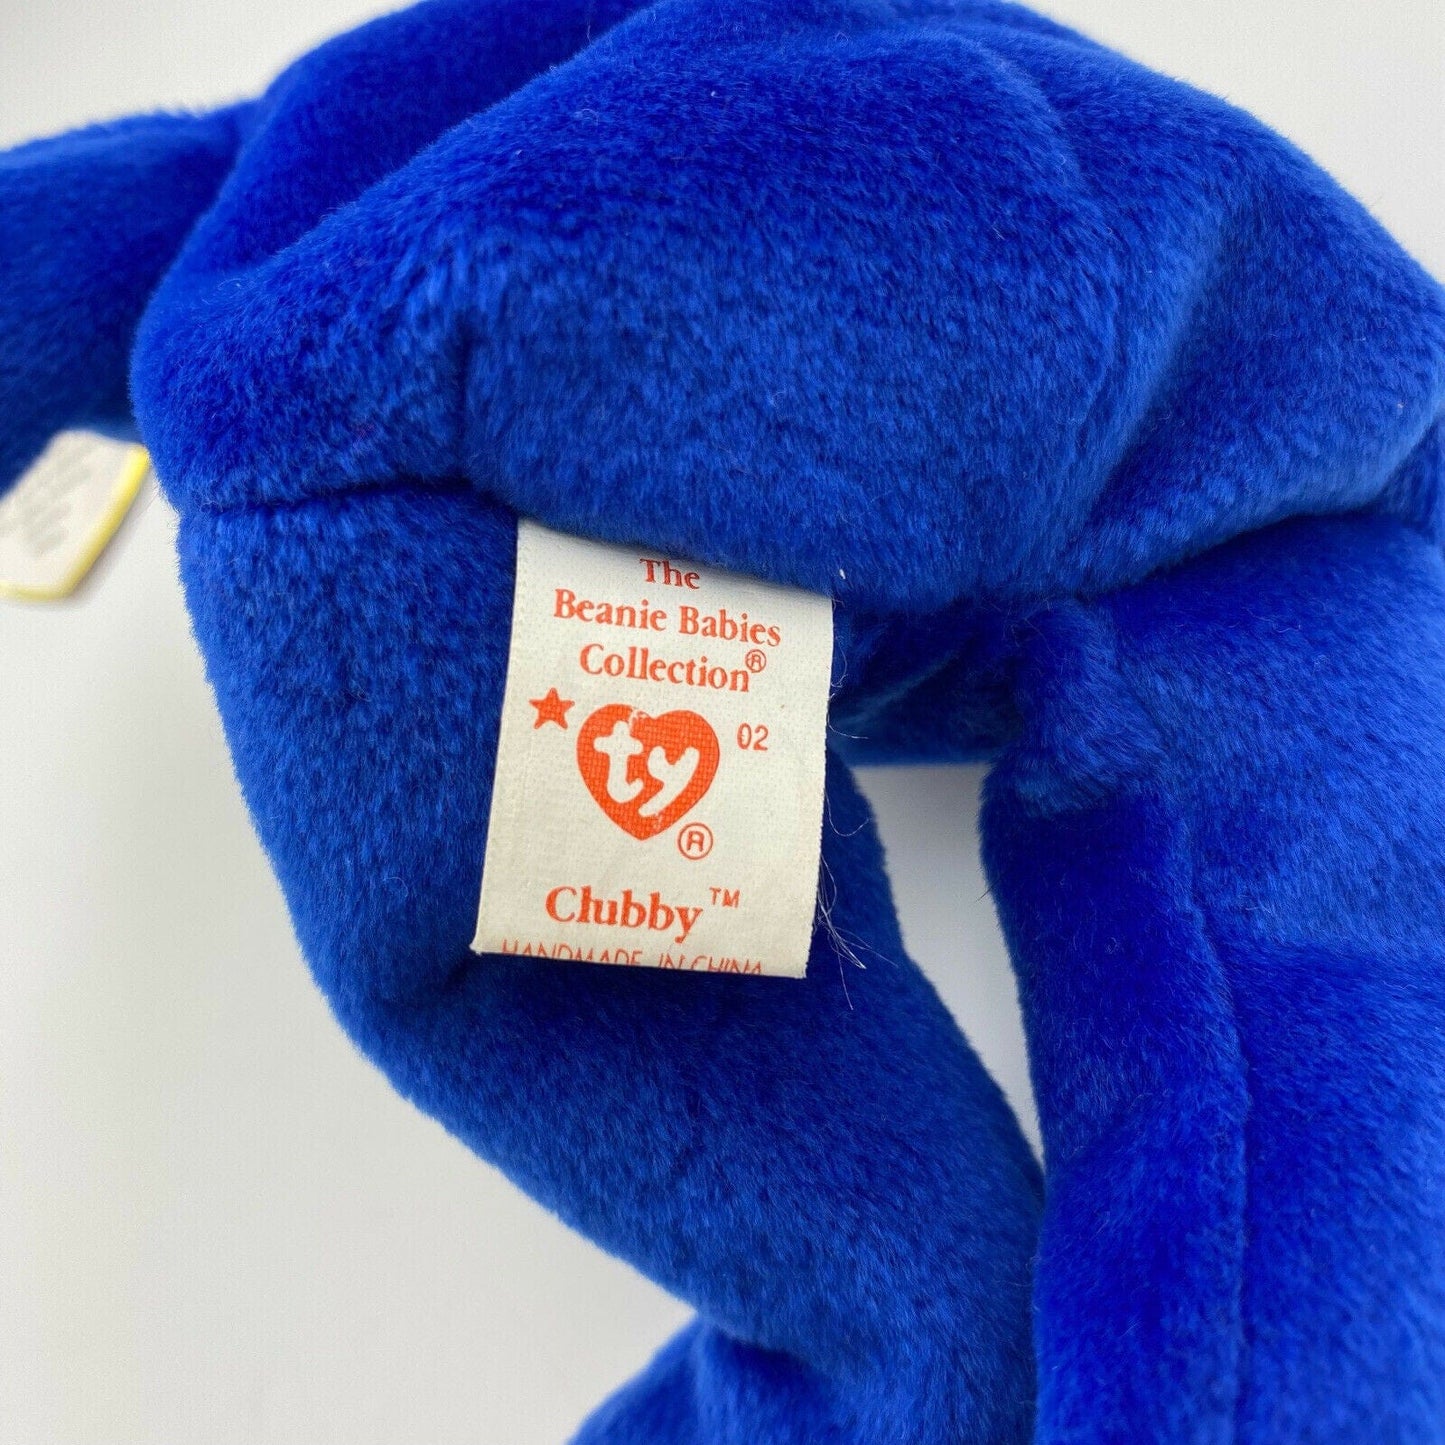 Ty Original Beanie Babies - “Clubby” The Bear - 1998 - EXCELLENT Condition